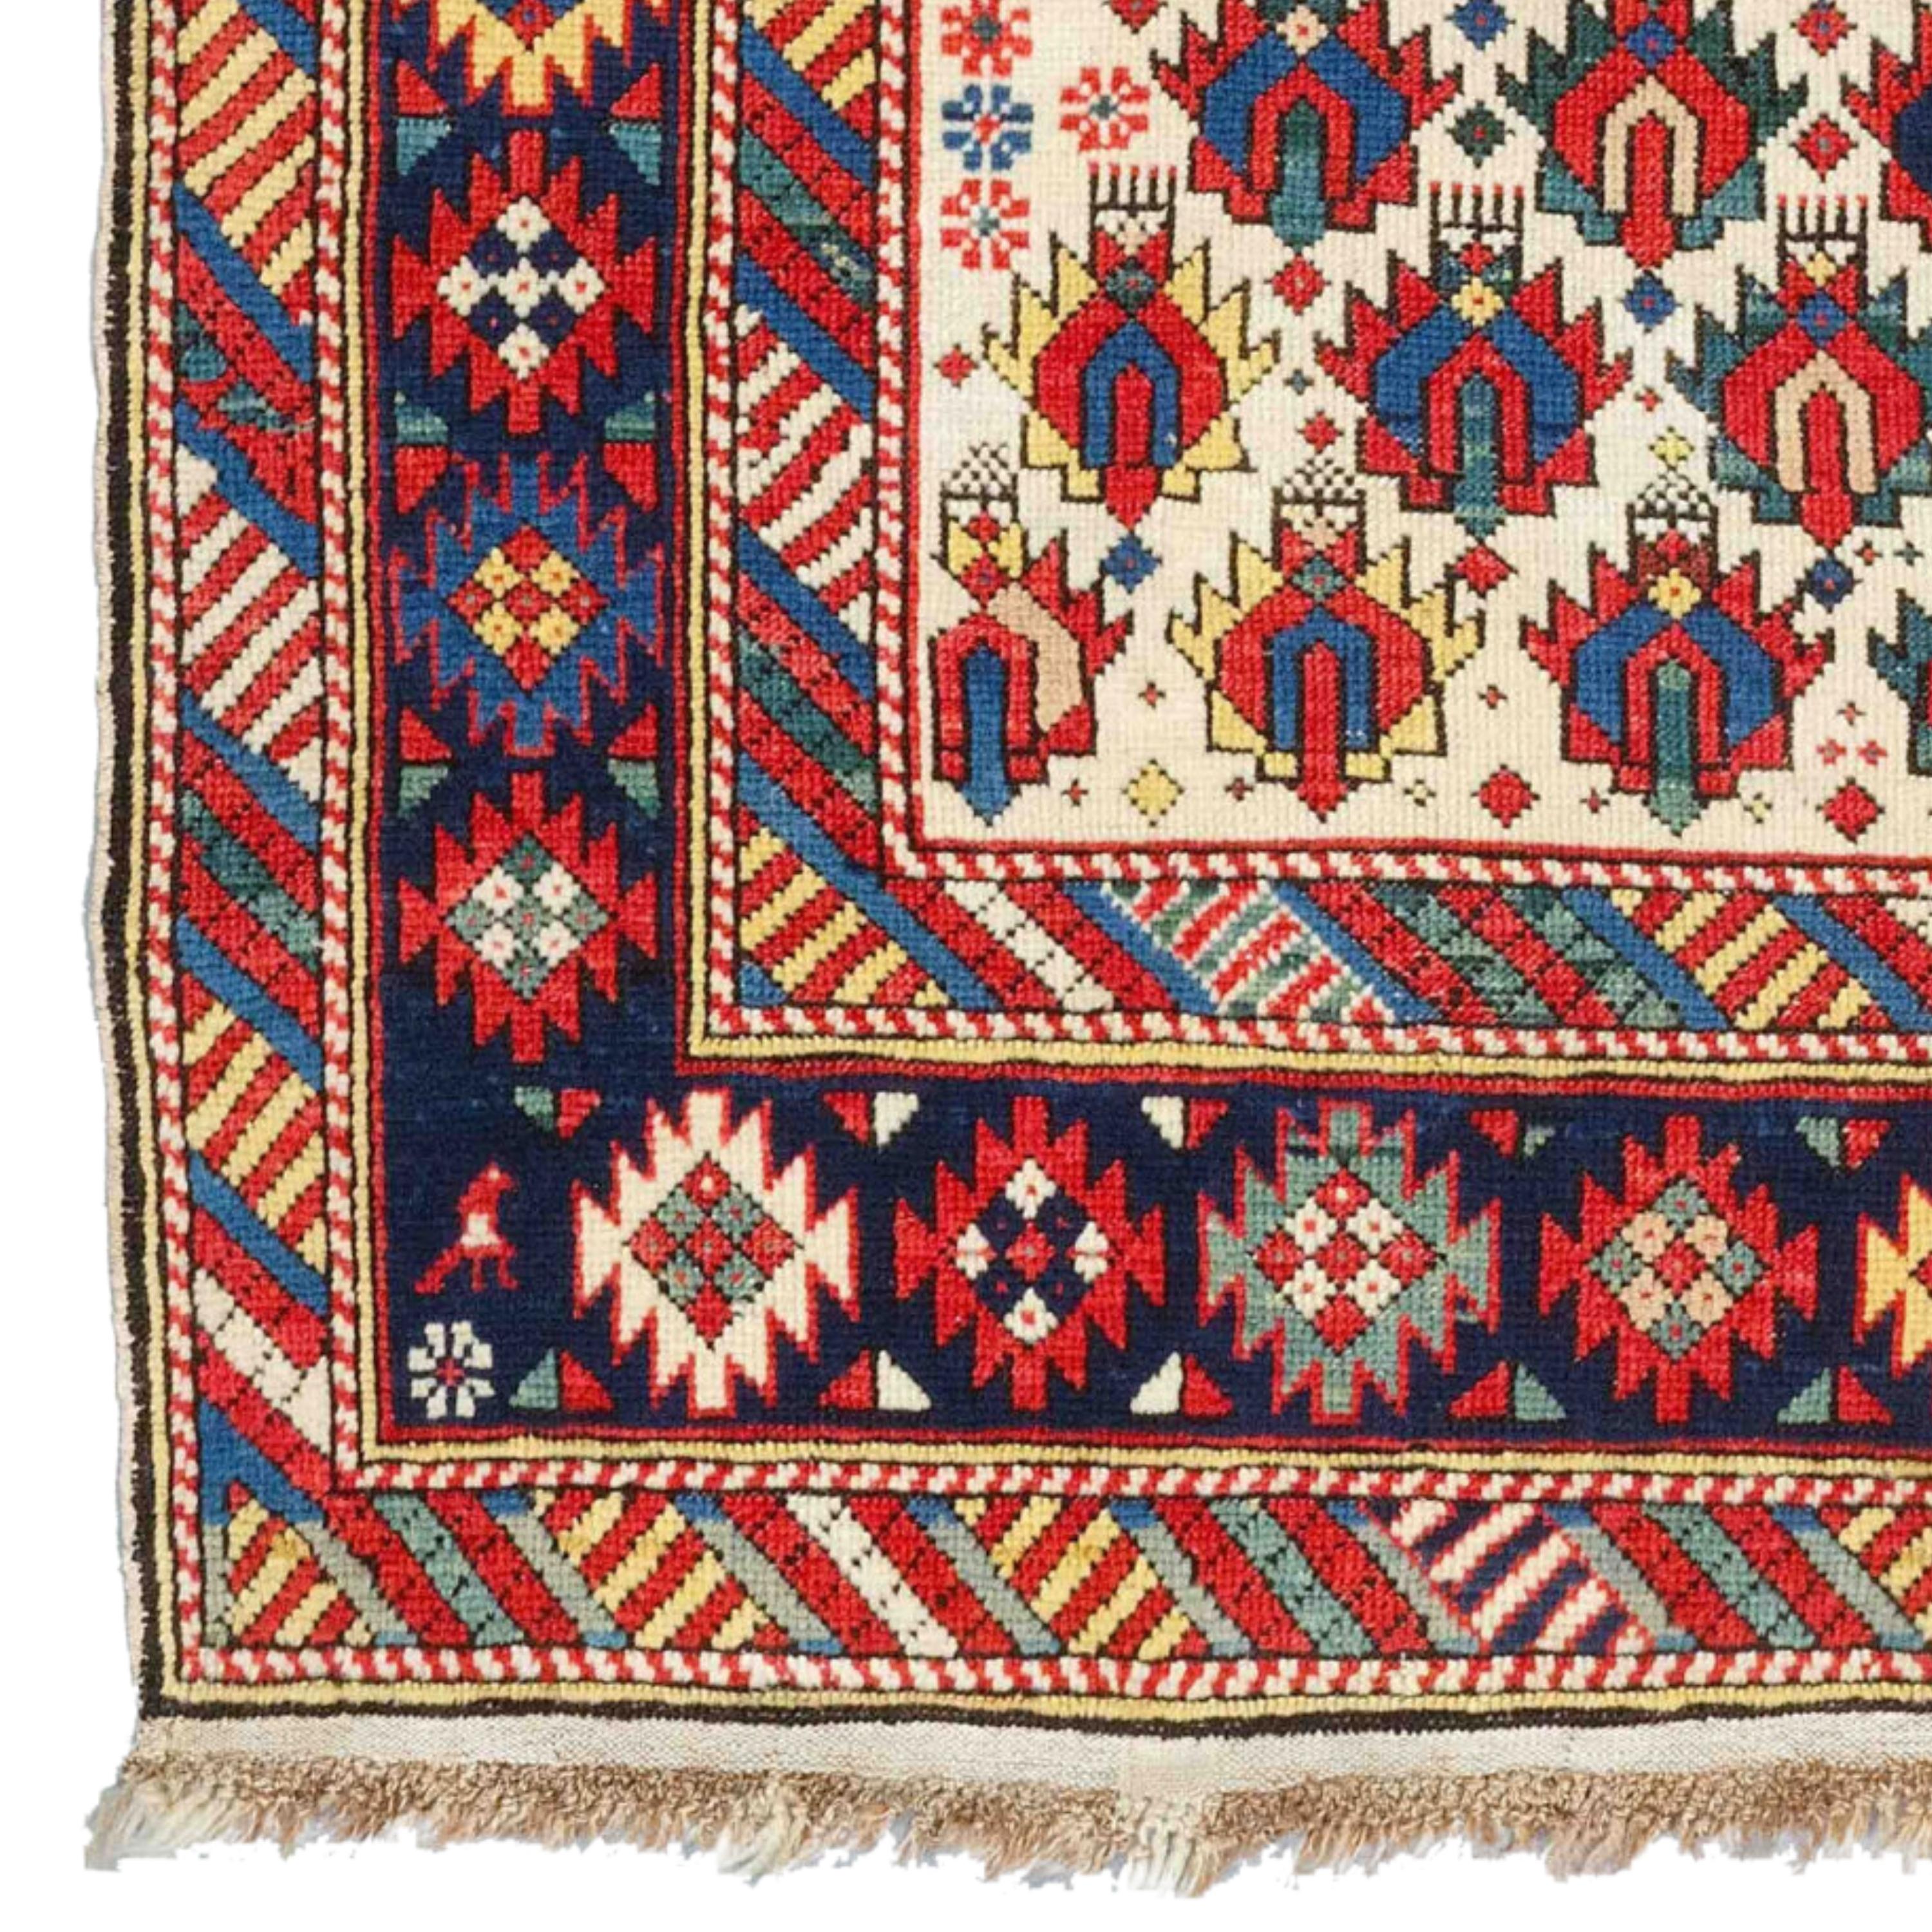 Kuba Rug | Caucasus Rug
Middle of the 19th Century Caucasian Kuba Rug

Kuba carpet, floor covering from the Caucasus woven around Kuba (now Kuba) in northern Azerbaijan. Several important types of Kuba carpets from the past century and a half were